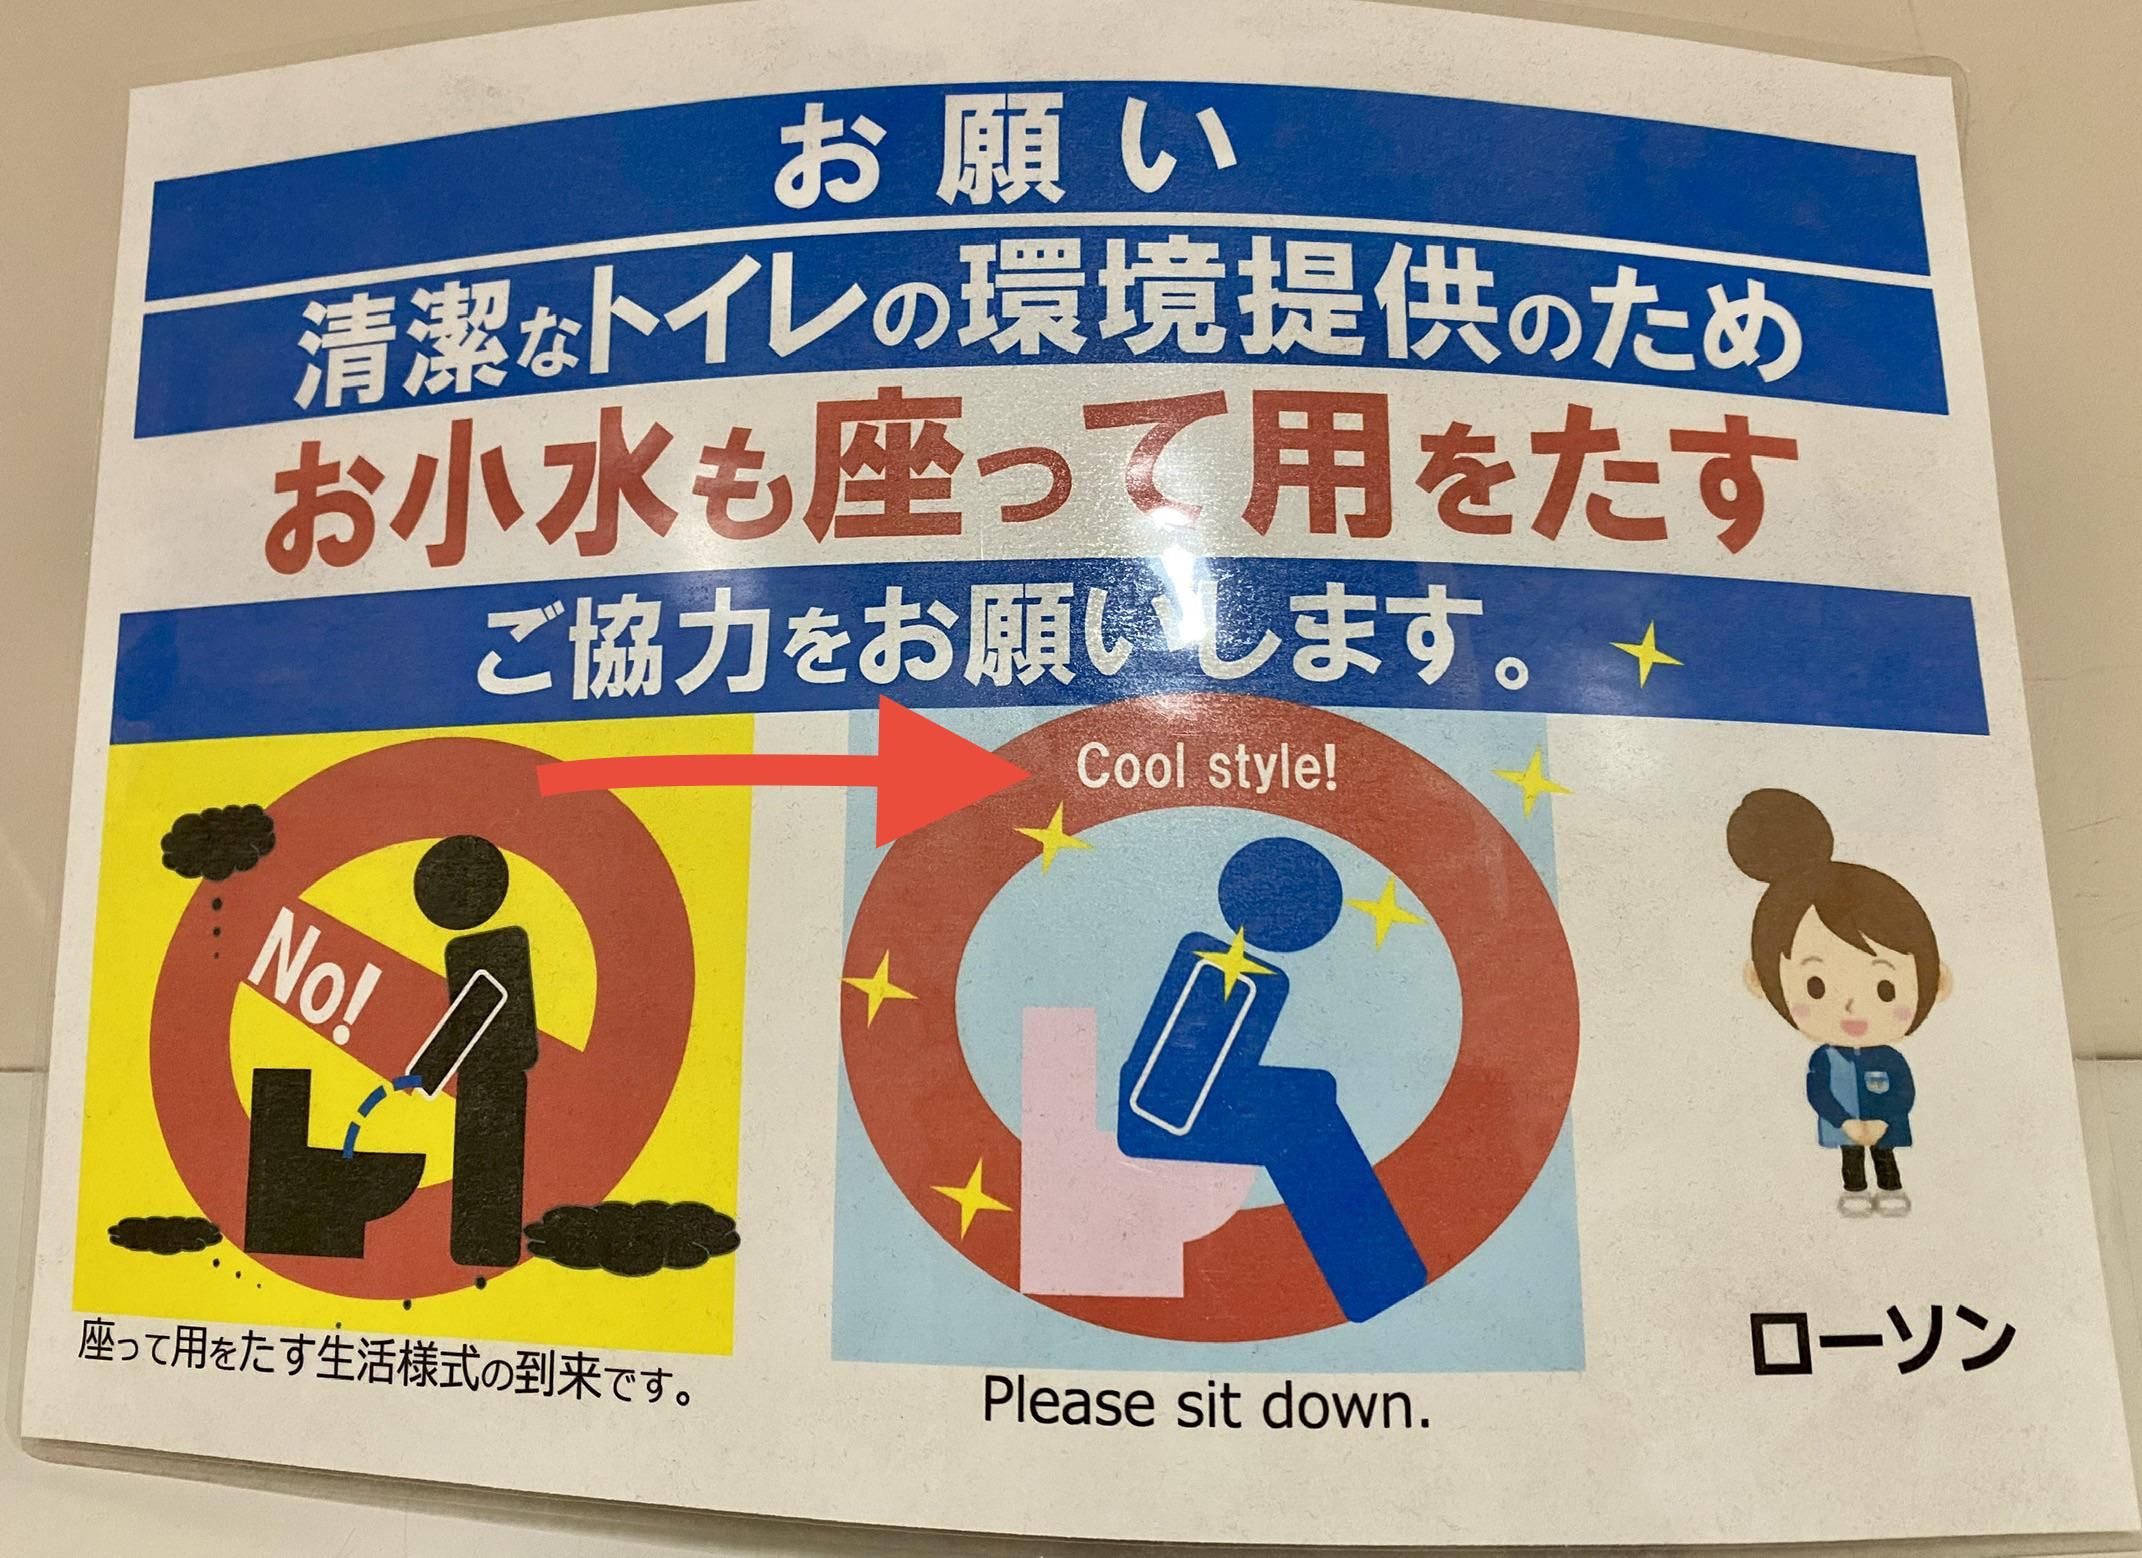 Sitting to pee is “cool style” for men in Japan. Did you know it’s rude to tinkle standing up? This sign is was made for foreigners